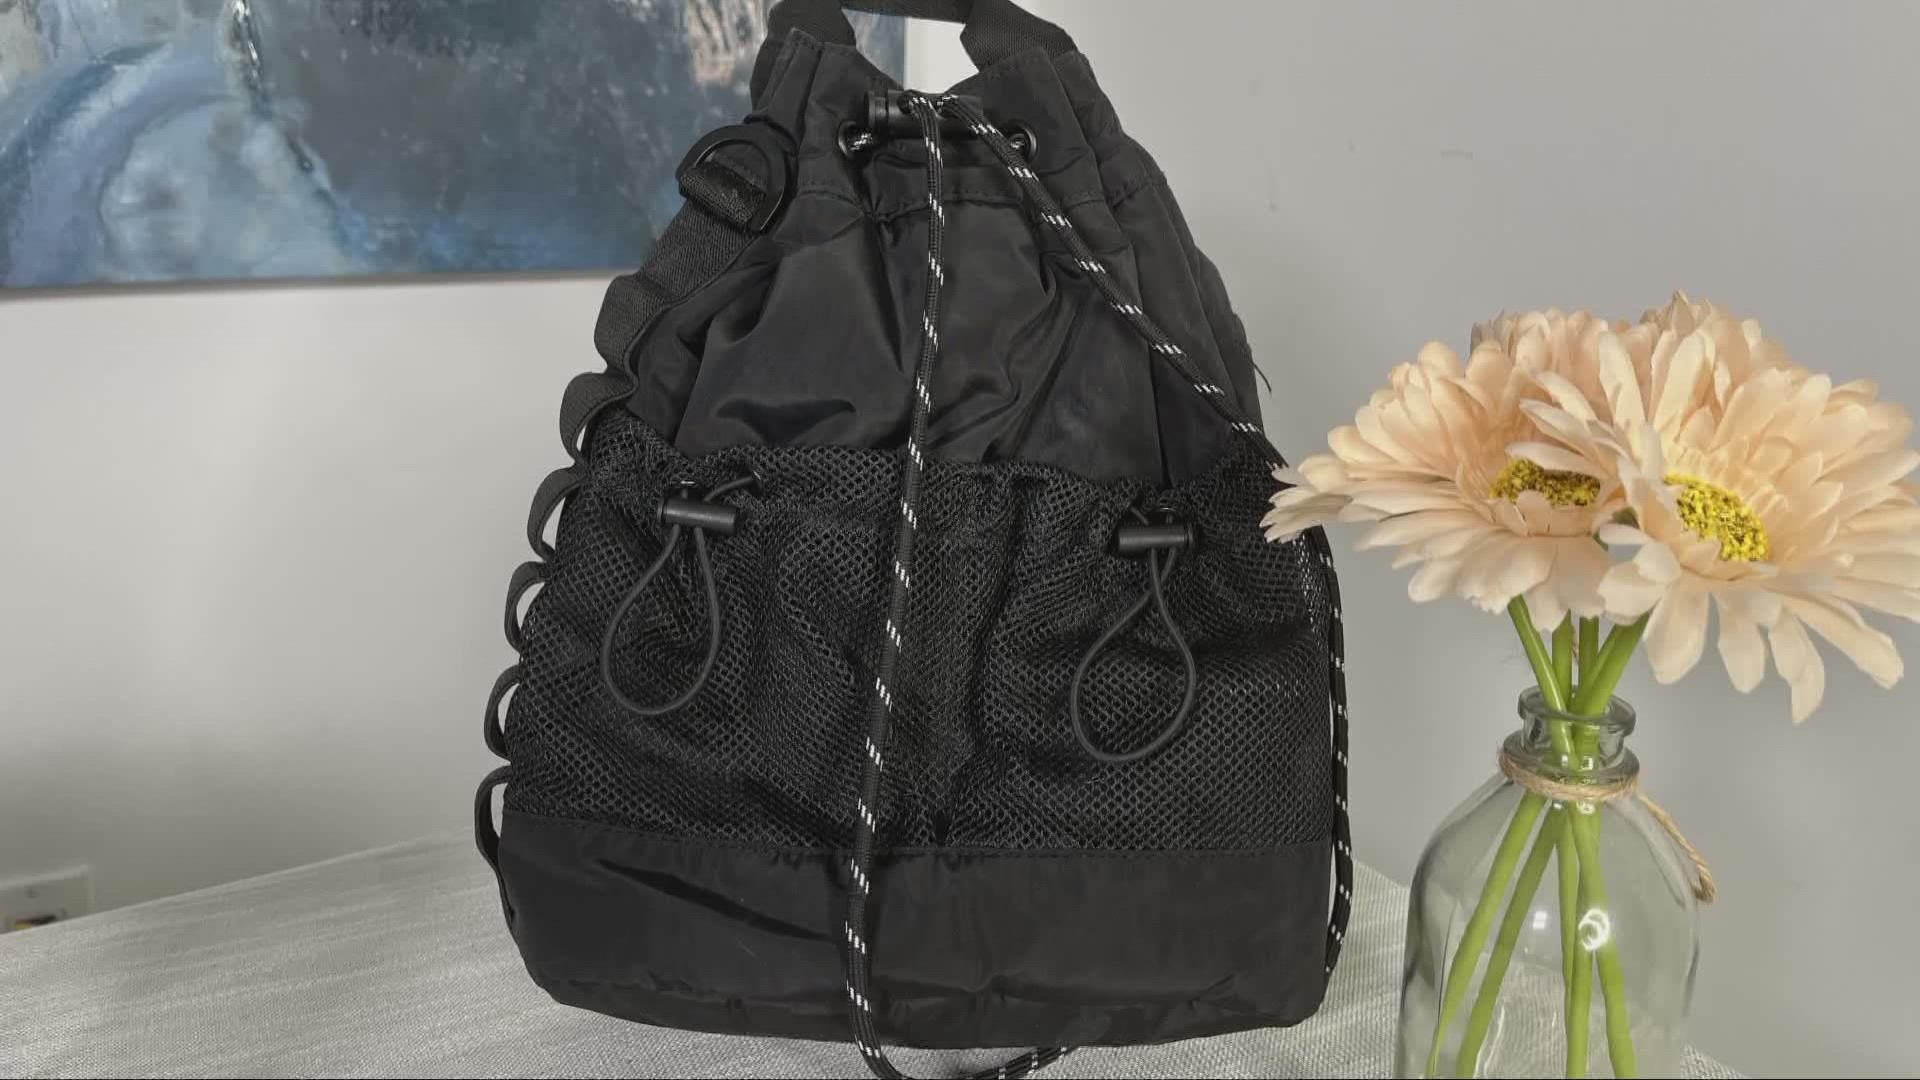 See summer essentials for keeping mosquitos away, keeping our skin hydrated, and easy and chic way to travel this summer. This segment paid for by Be Chic Media.